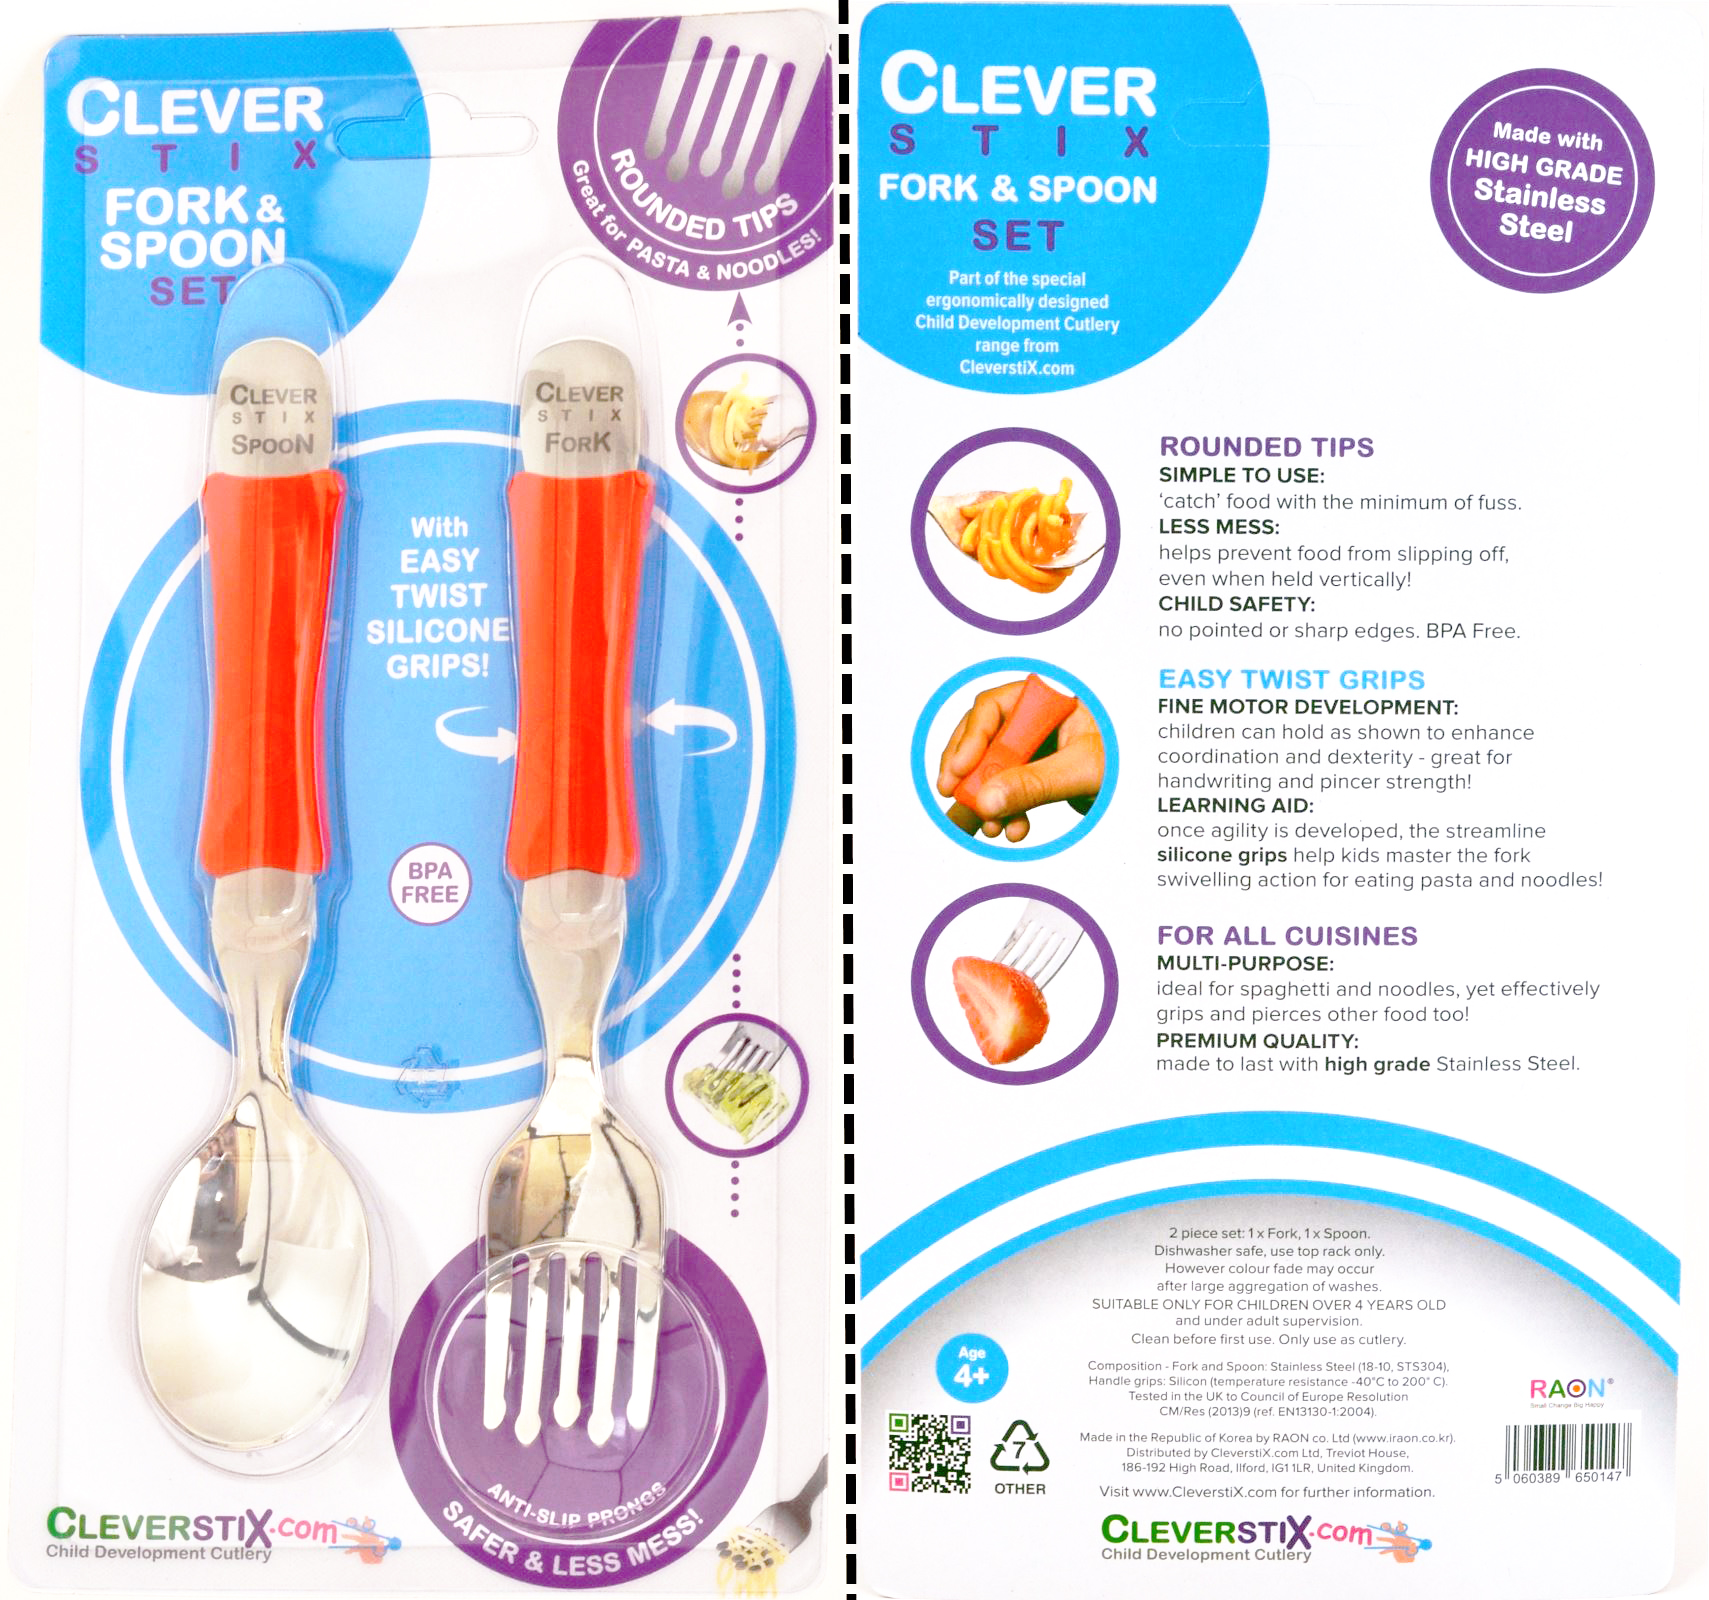 Clever fork & spoon set